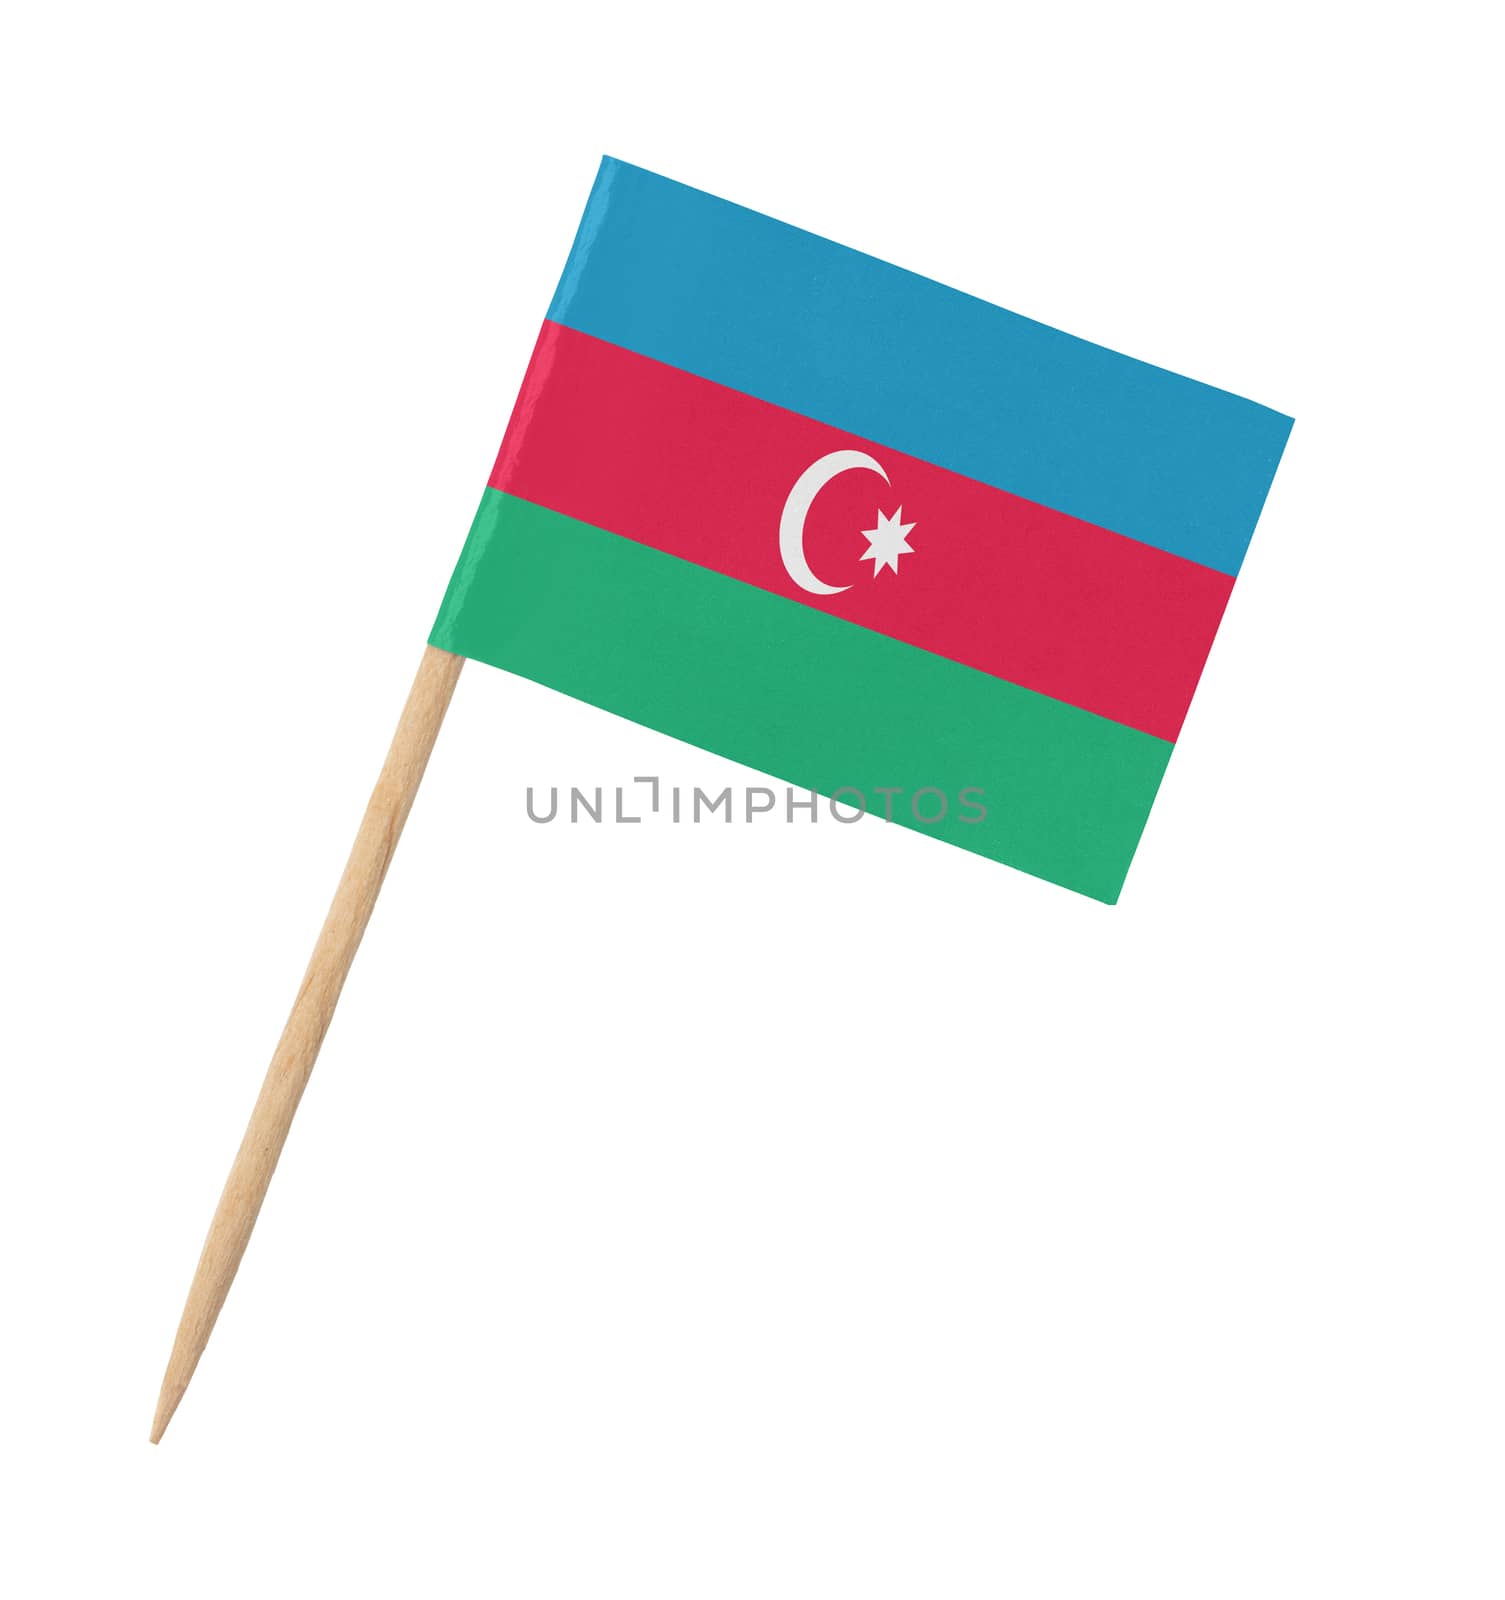 Small paper flag of Azerbaijan on wooden stick by michaklootwijk